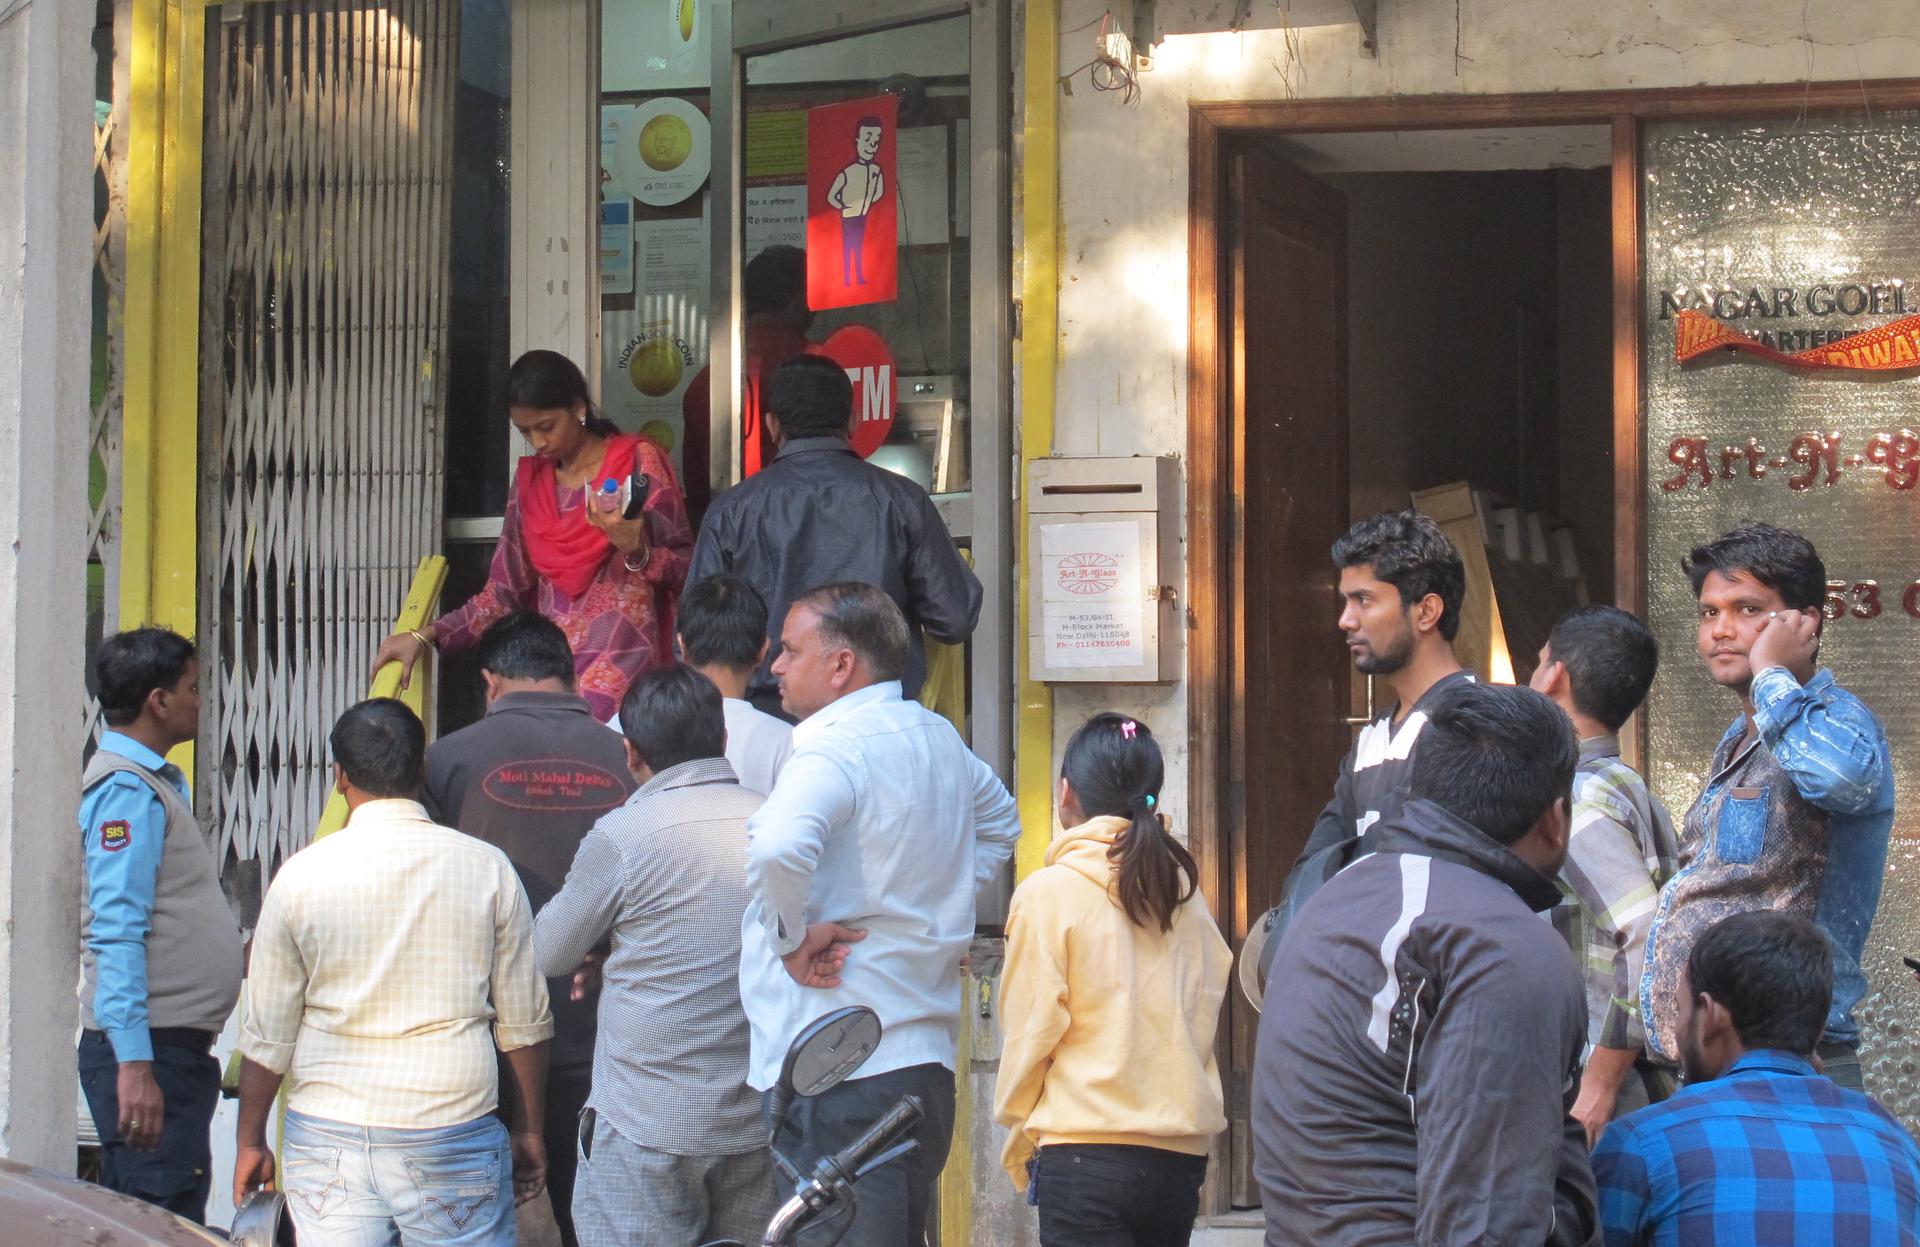 Two weeks after Prime Minister Narendra Modi announced the demonetization of 500 and 1000 rupee currency notes, residents of south Delhi continue to line up in front of ATMs in hopes of withdrawing cash.